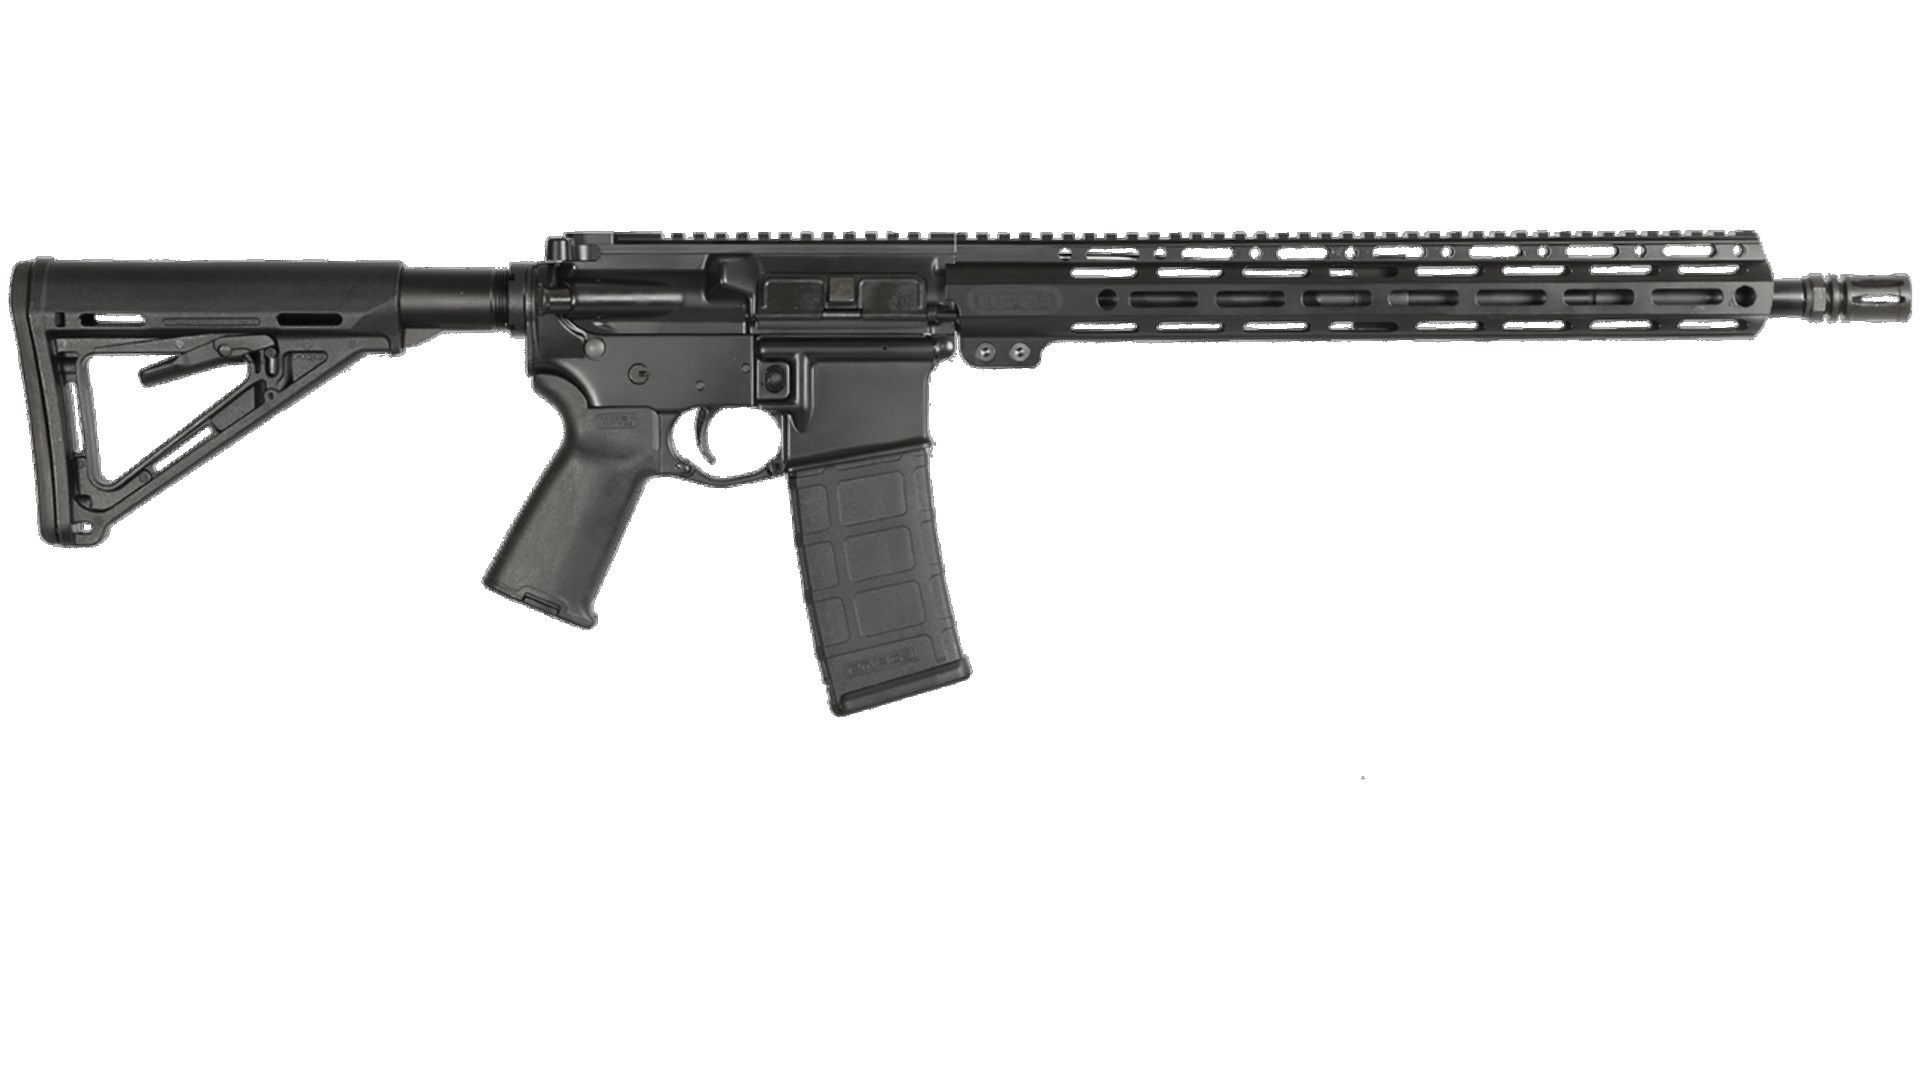 Right side of the Bersa BAR15 rifle chambered in 5.56 NATO or .300 Blackout.